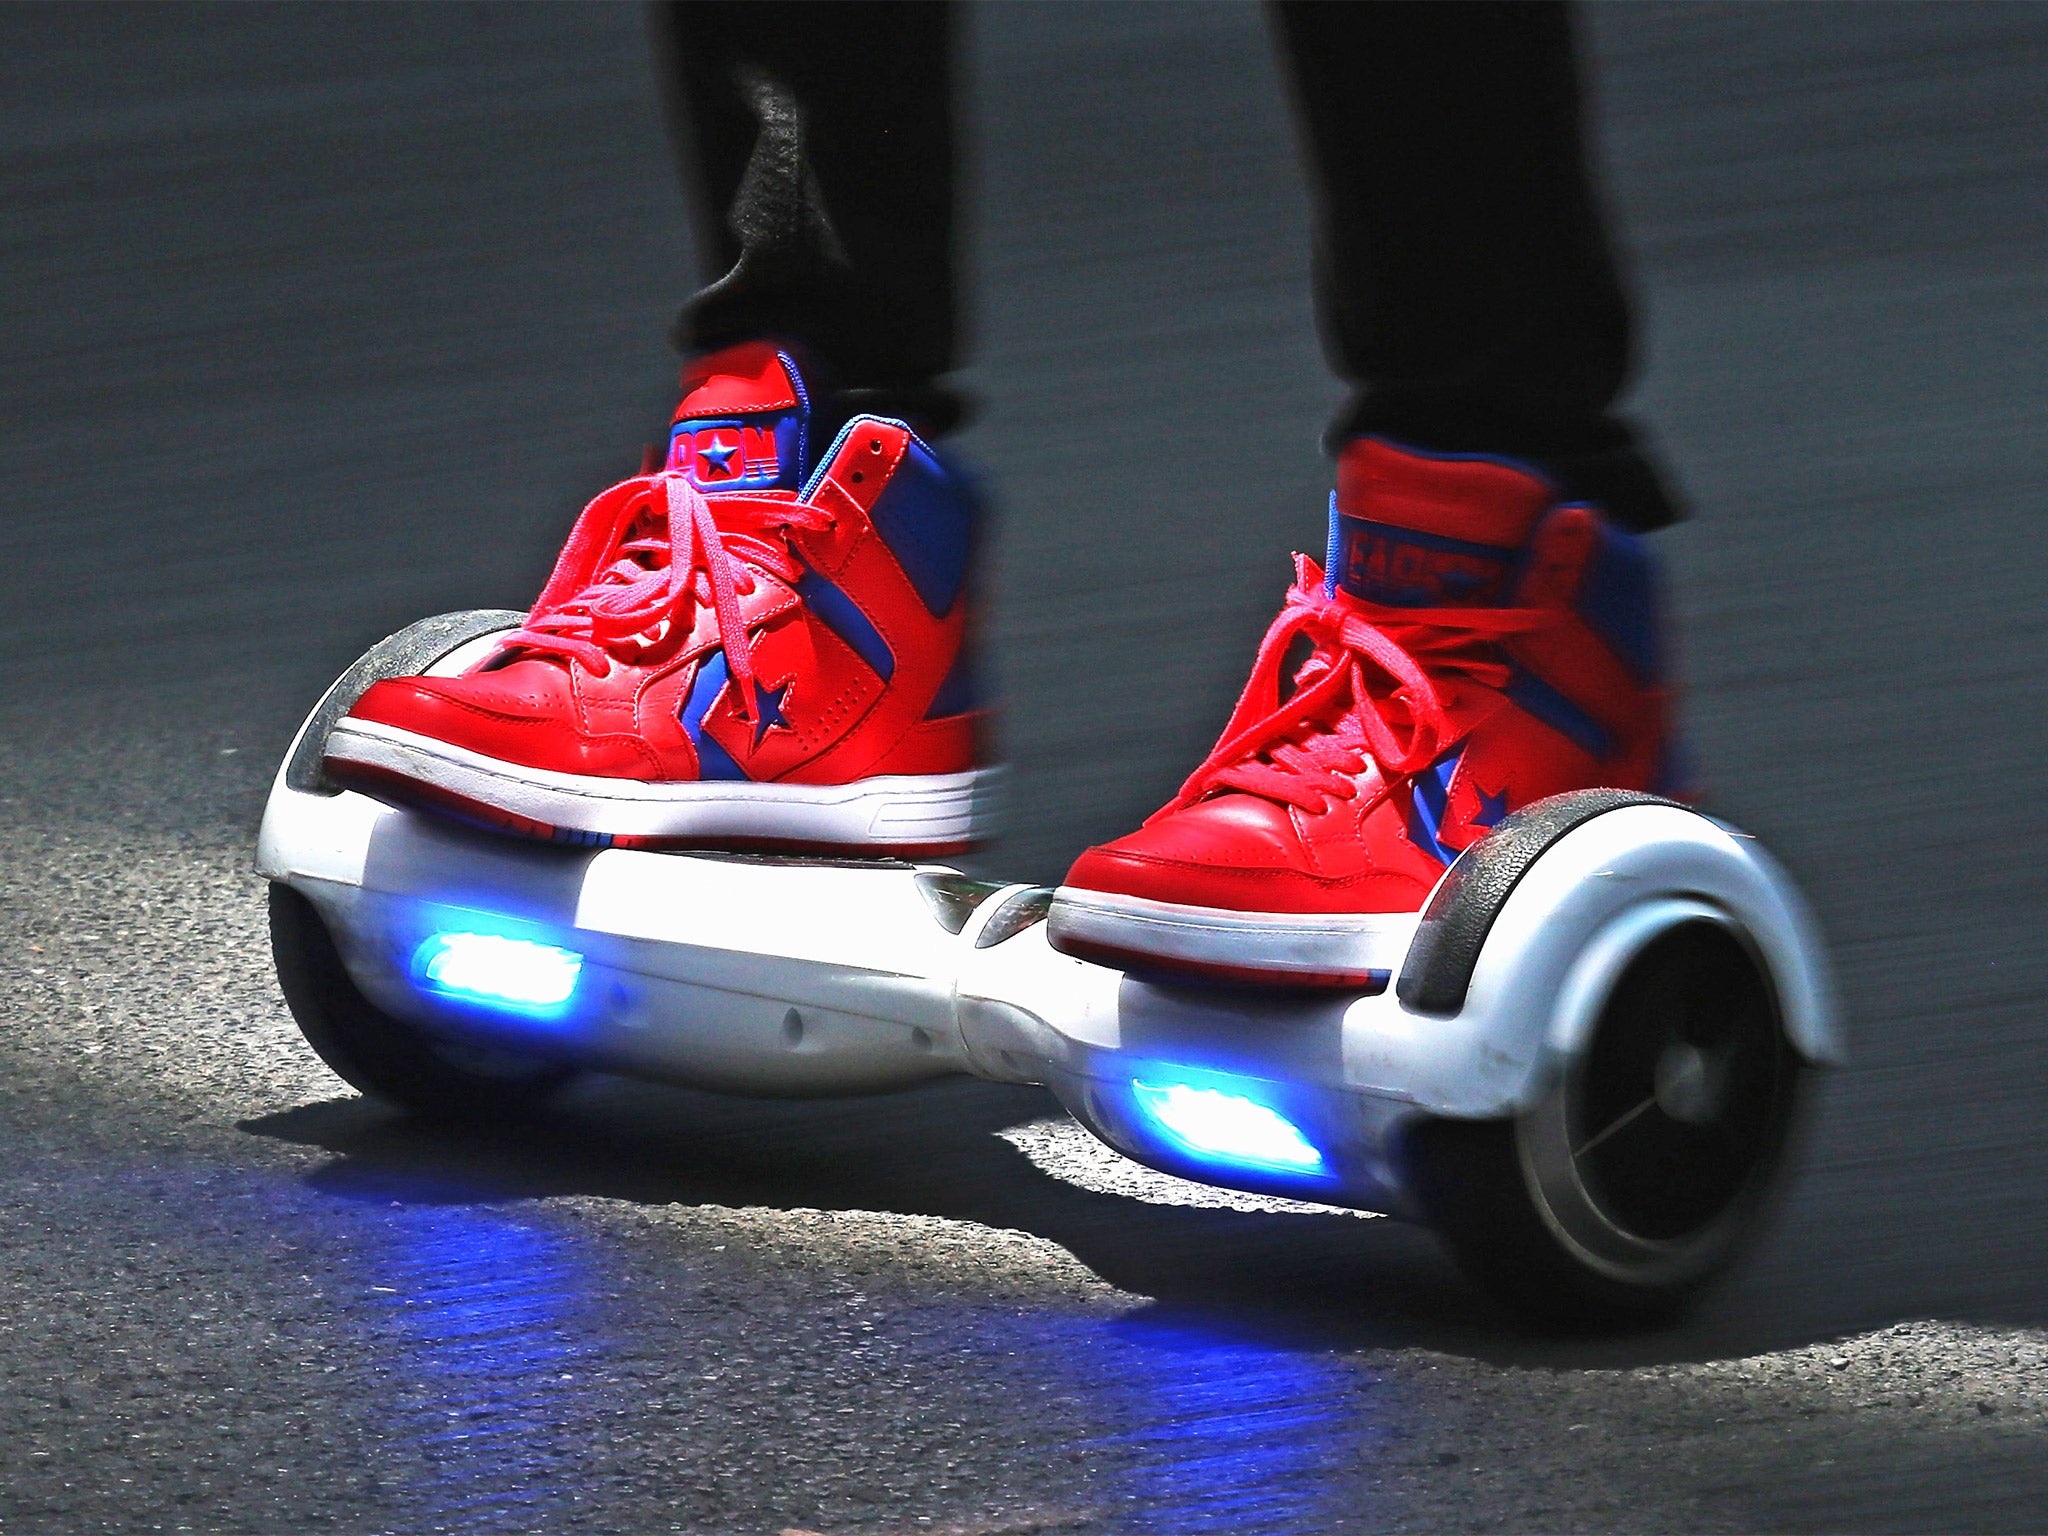 Trading standards officers have impounded 90 per cent of the 17,000 hoverboards they have examined at UK borders since 15 October